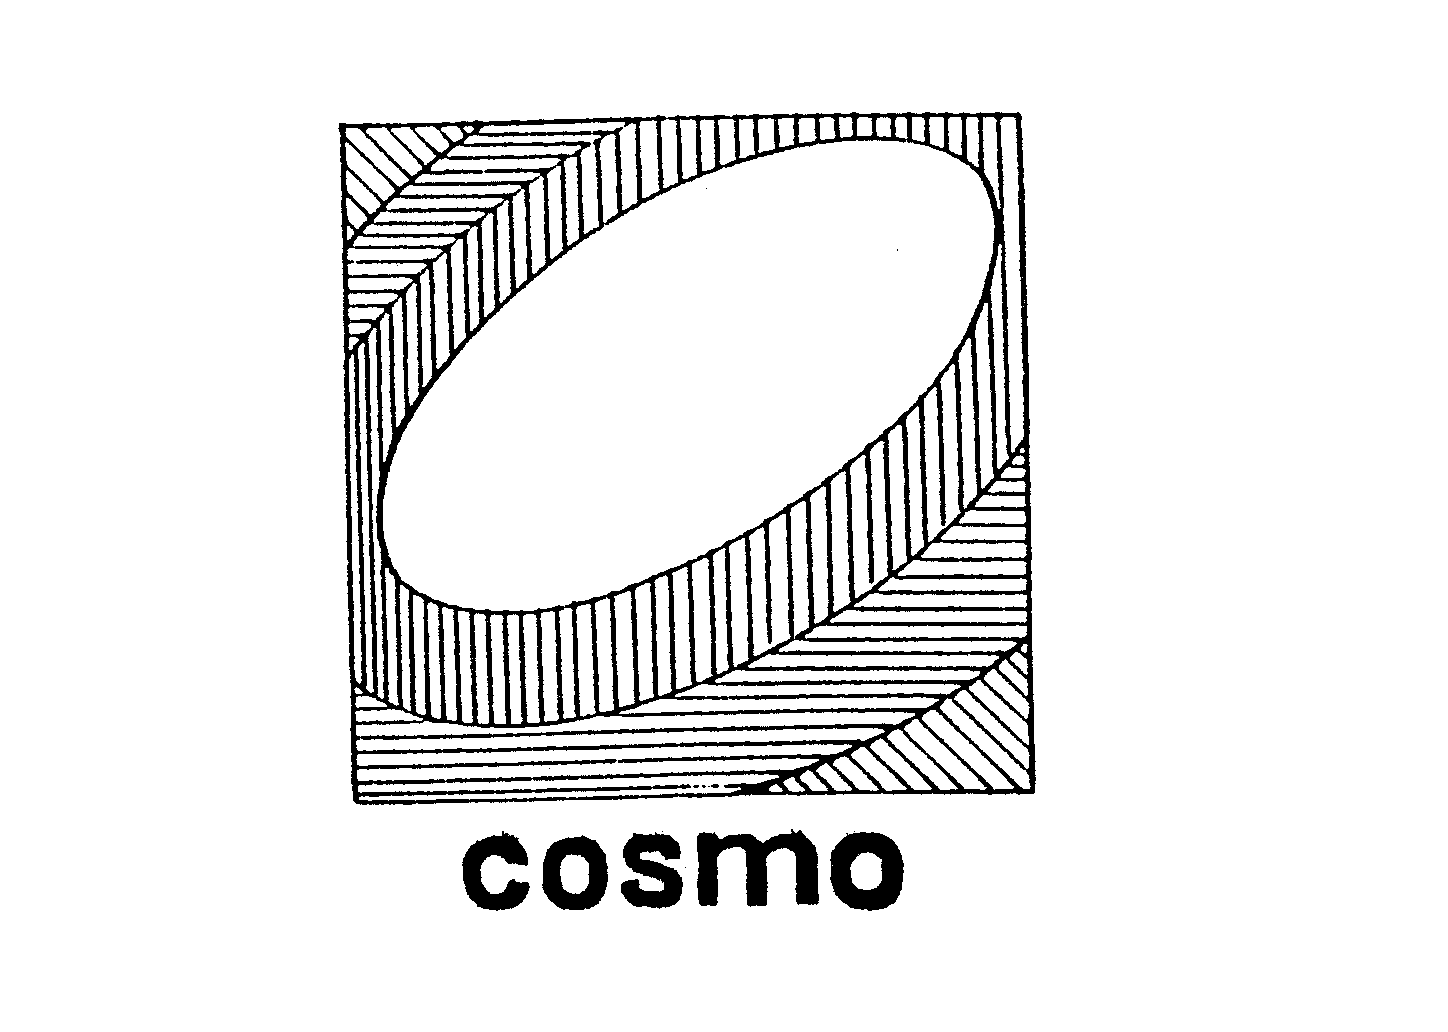  COSMO